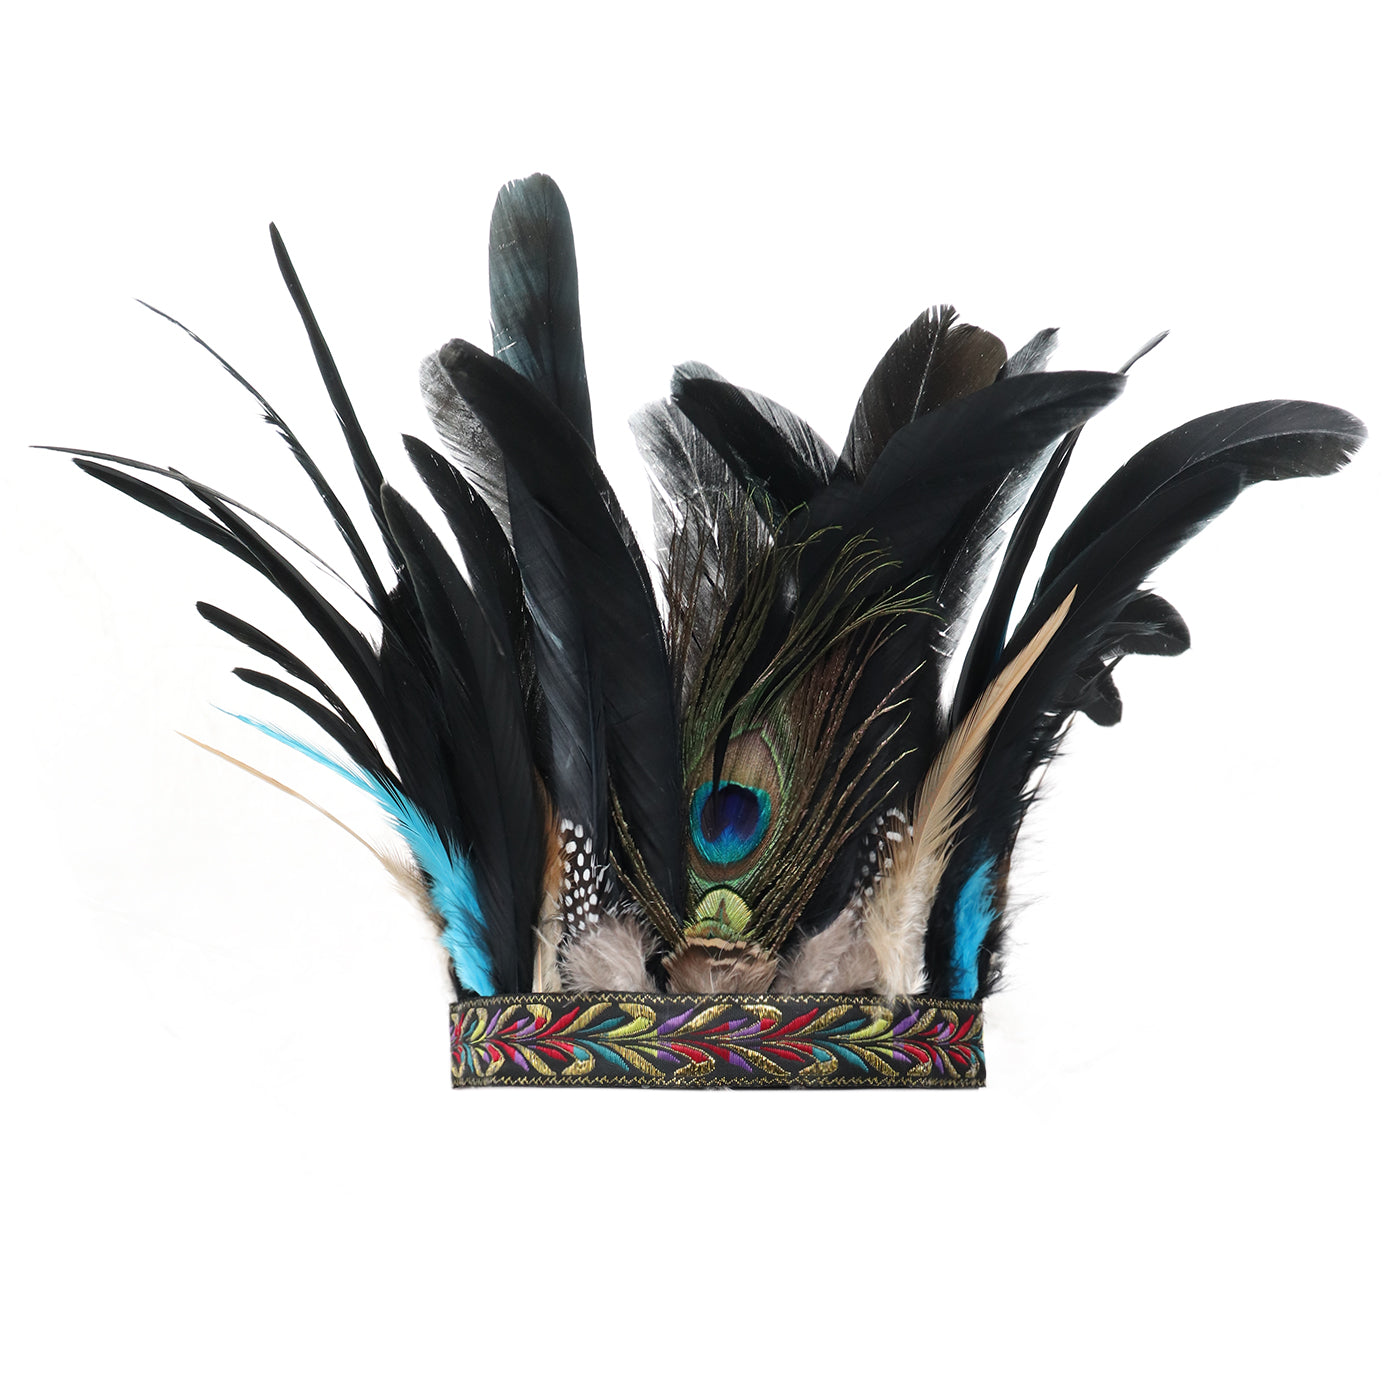 Peacock Feather Crown Carnival Headpiece Showgirl Headdress 1920s Flapper Accessories